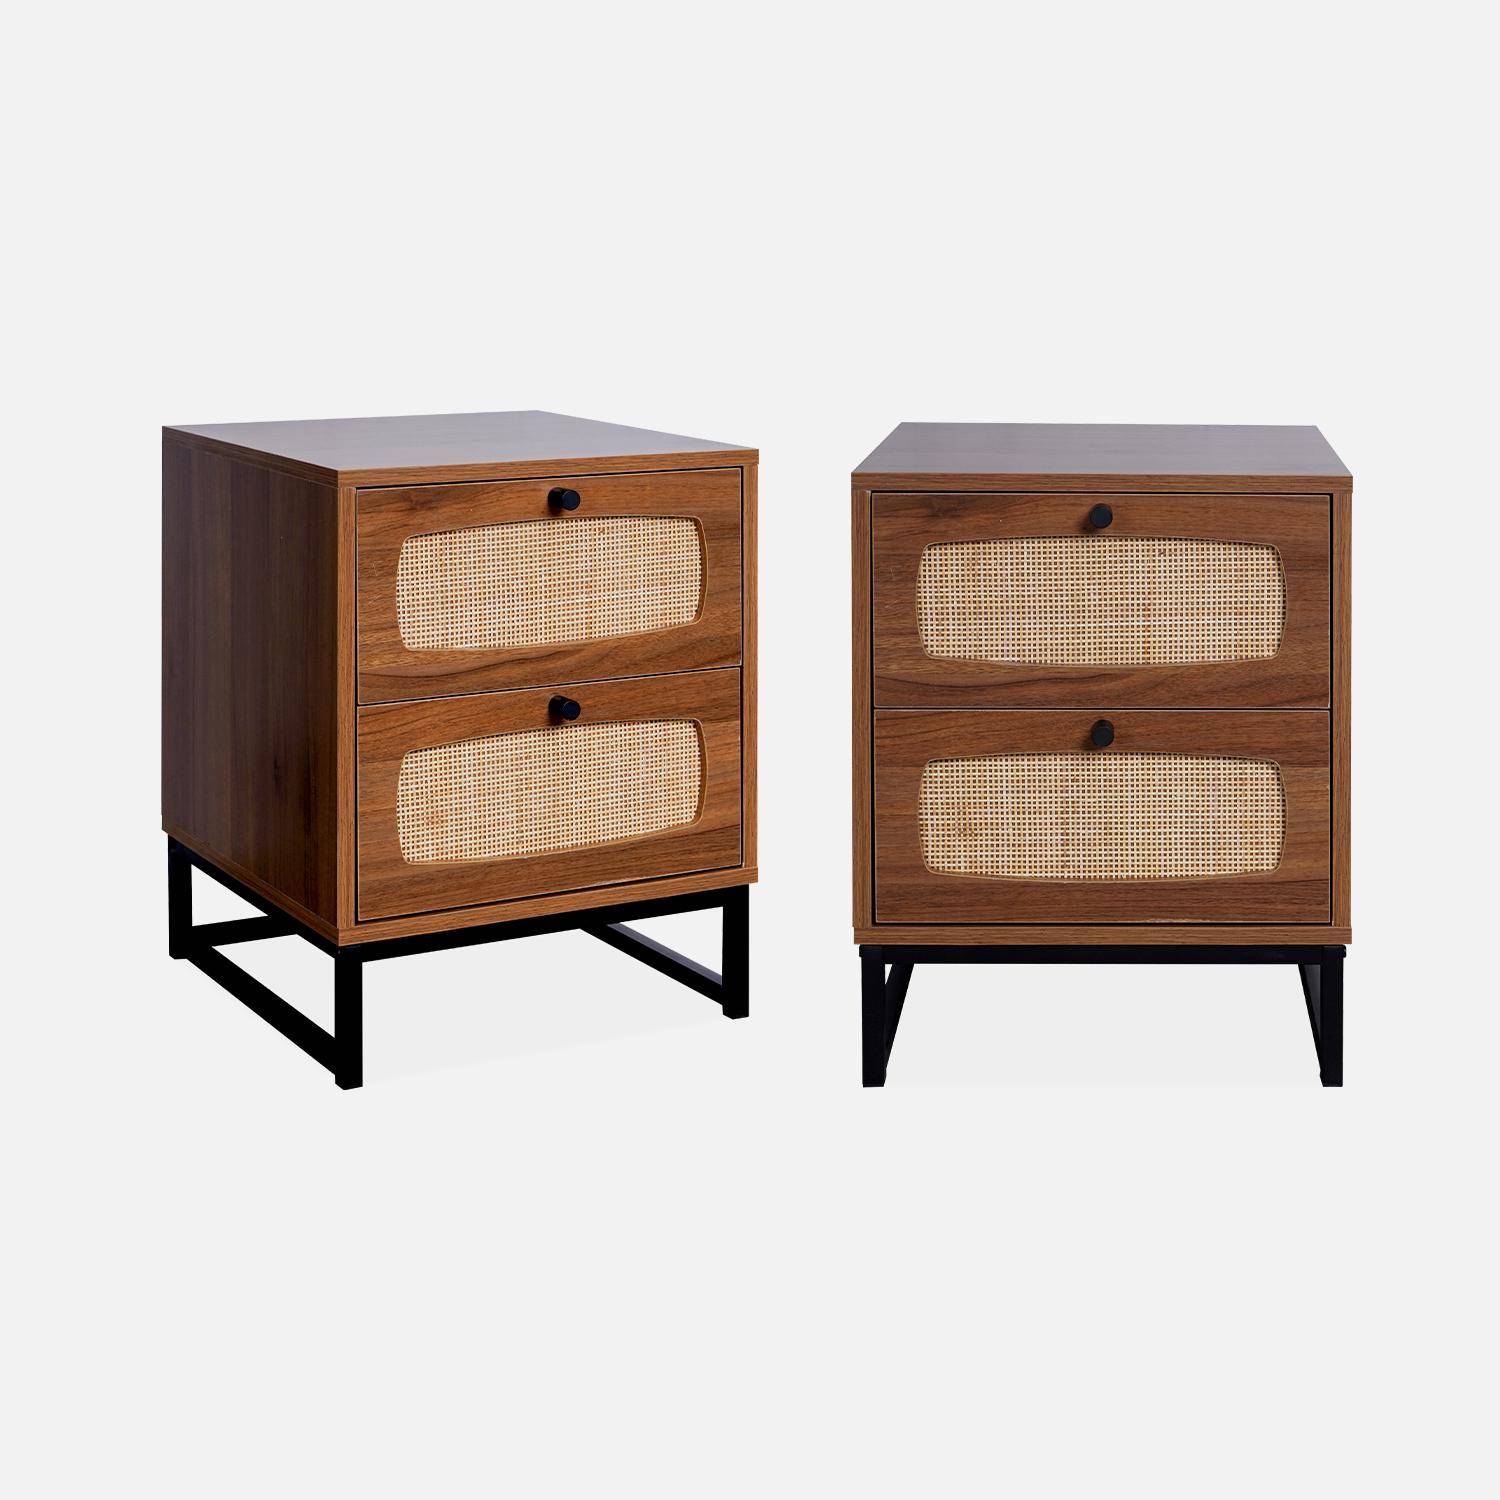 Set of 2 wood and cane bedside tables with black metal legs and handles,sweeek,Photo4